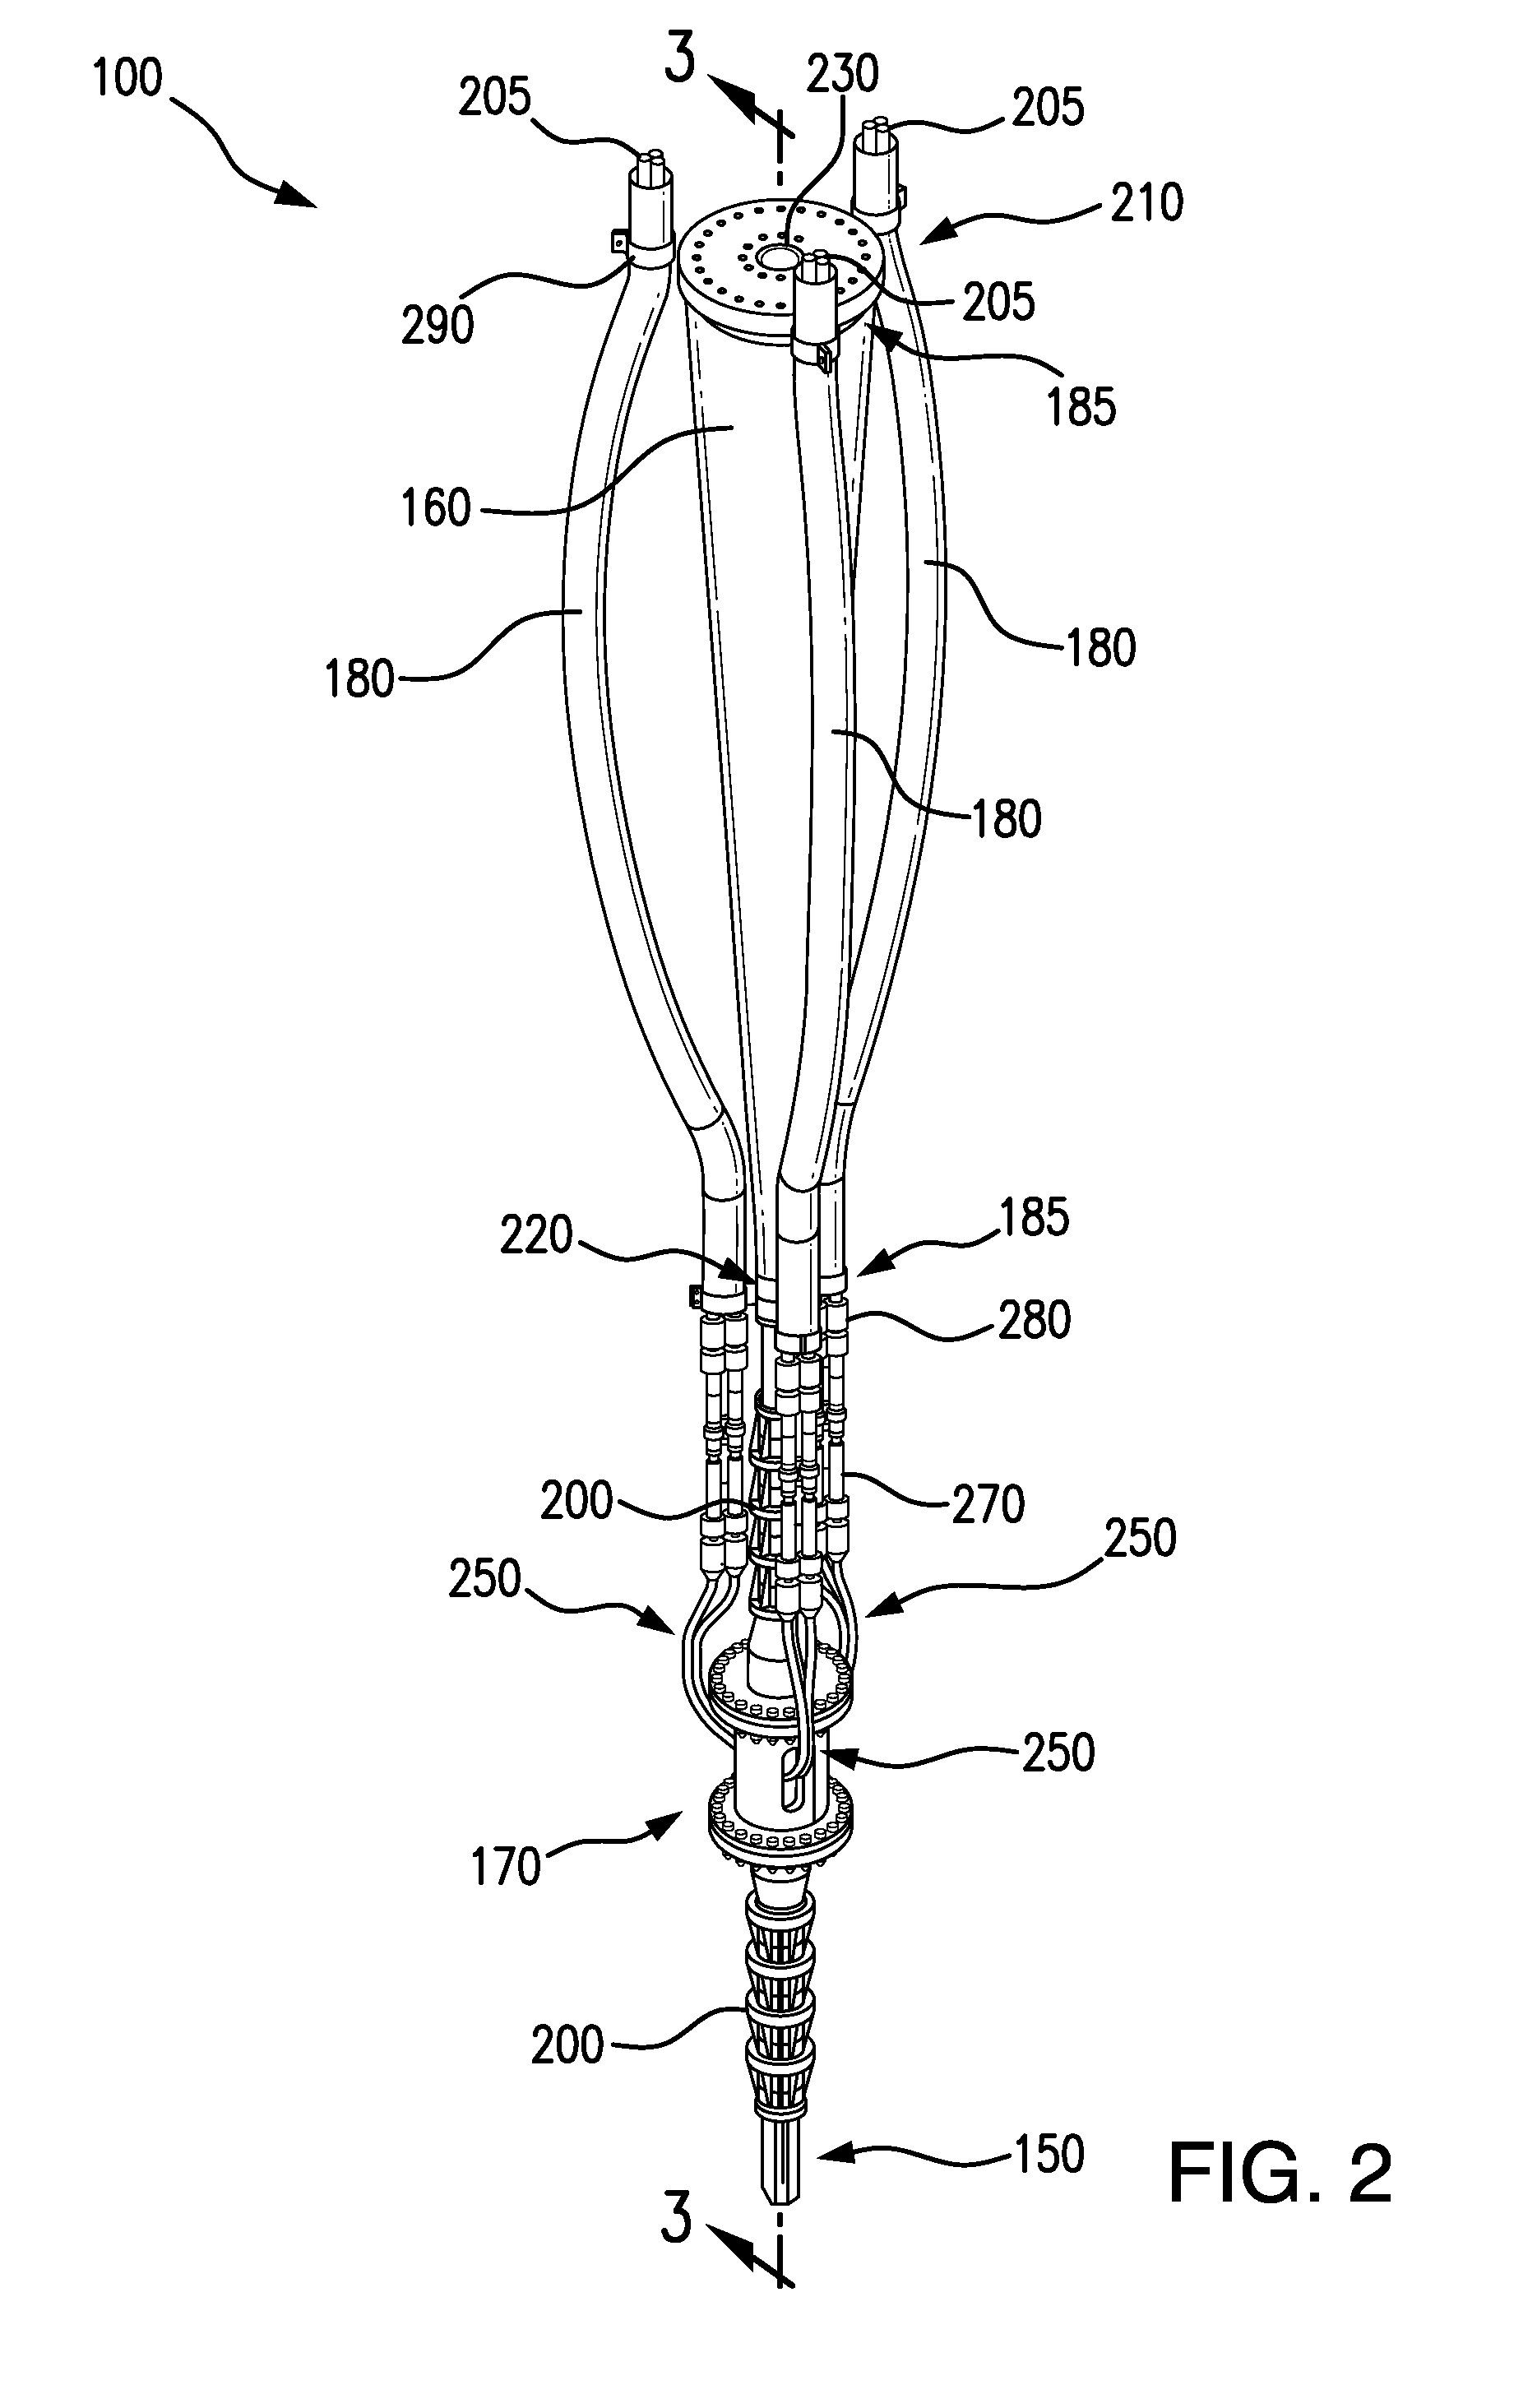 Subsea umbilical system with cable breakout